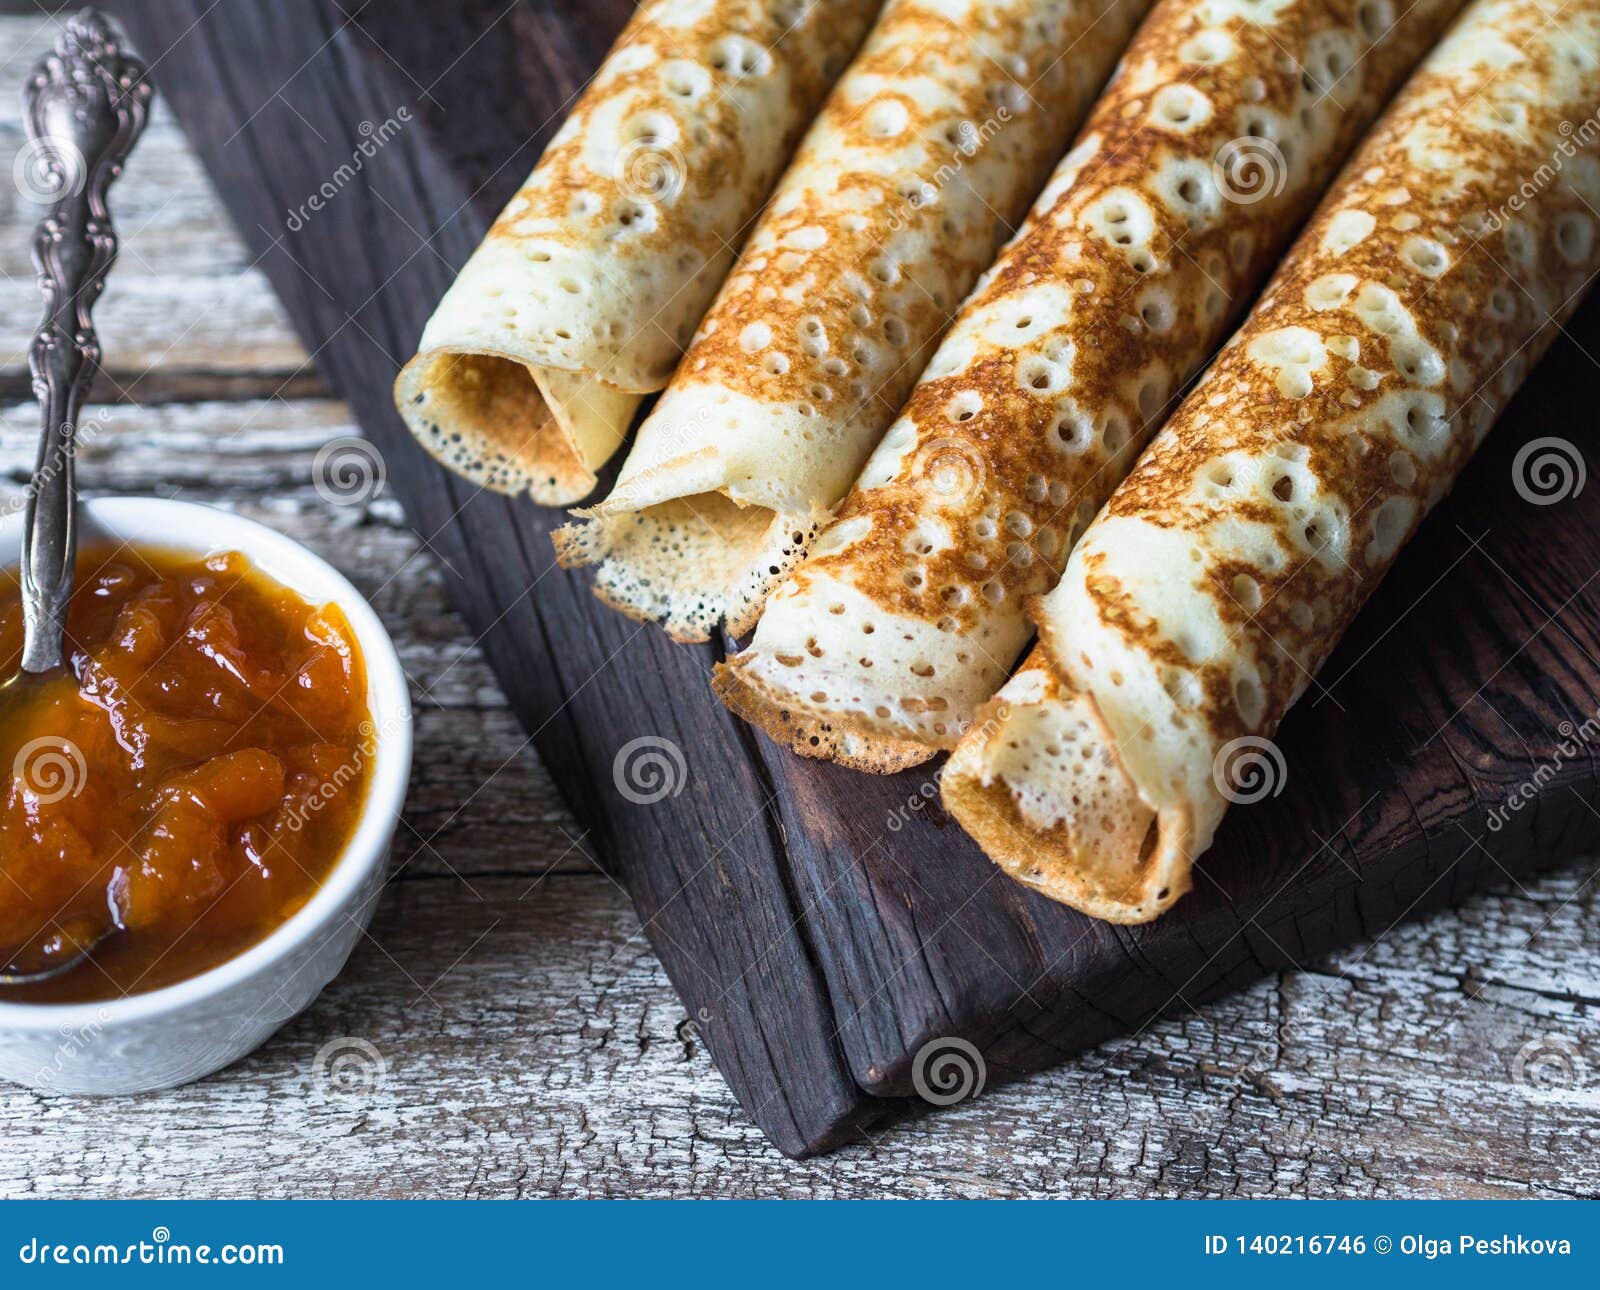 Russian Homemade Yeast Pancakes Rolled Into A Tube On Wood